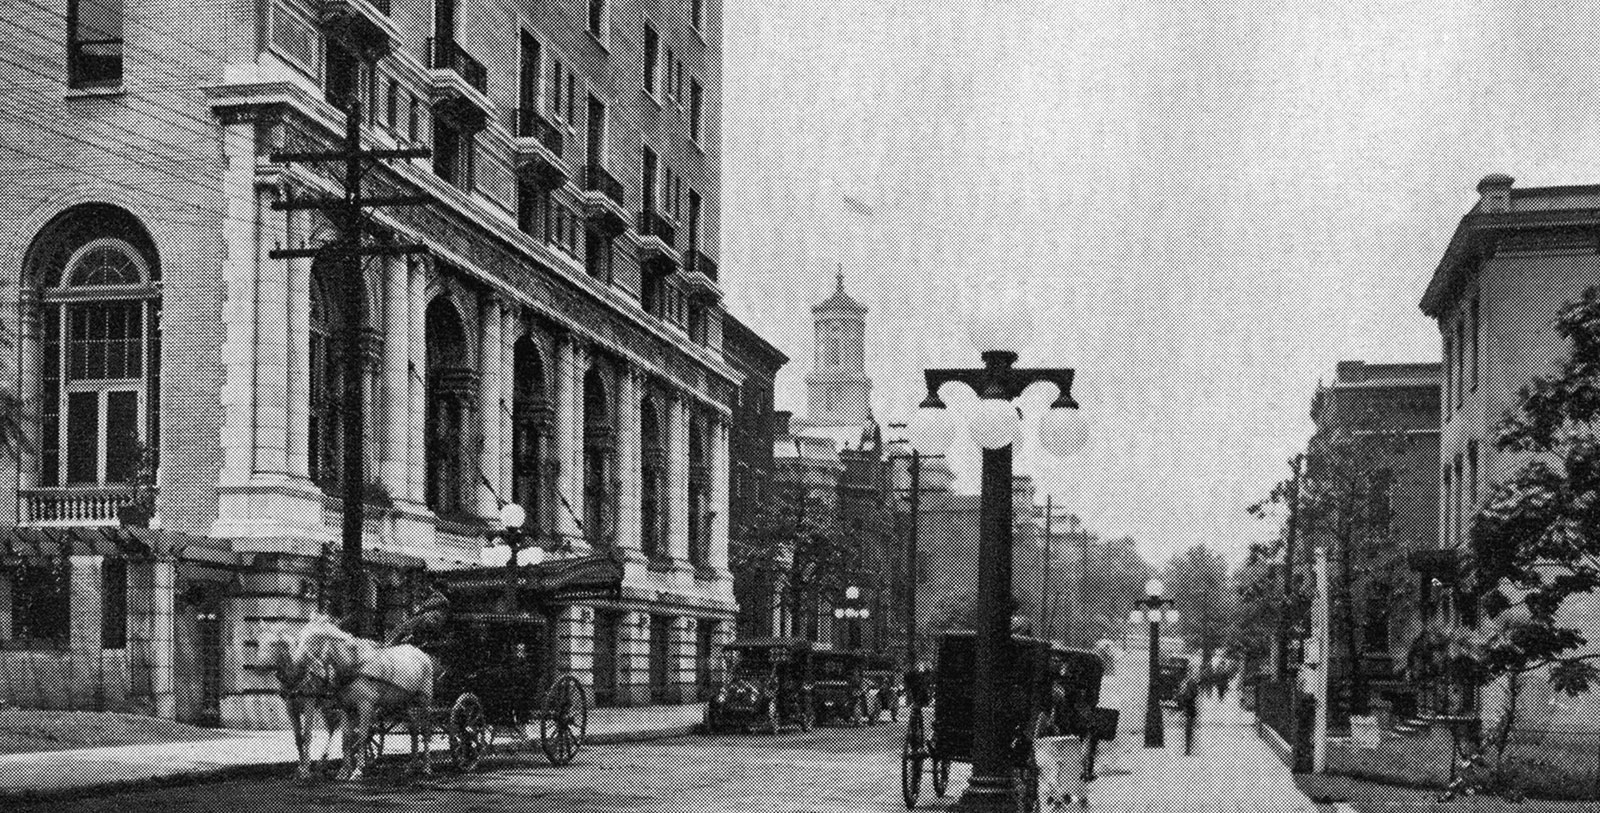 Historical Image of Exterior with Street View, The Hermitage Hotel, 1910, Member of Historic Hotels of America, in Nashville, Tennessee, History.